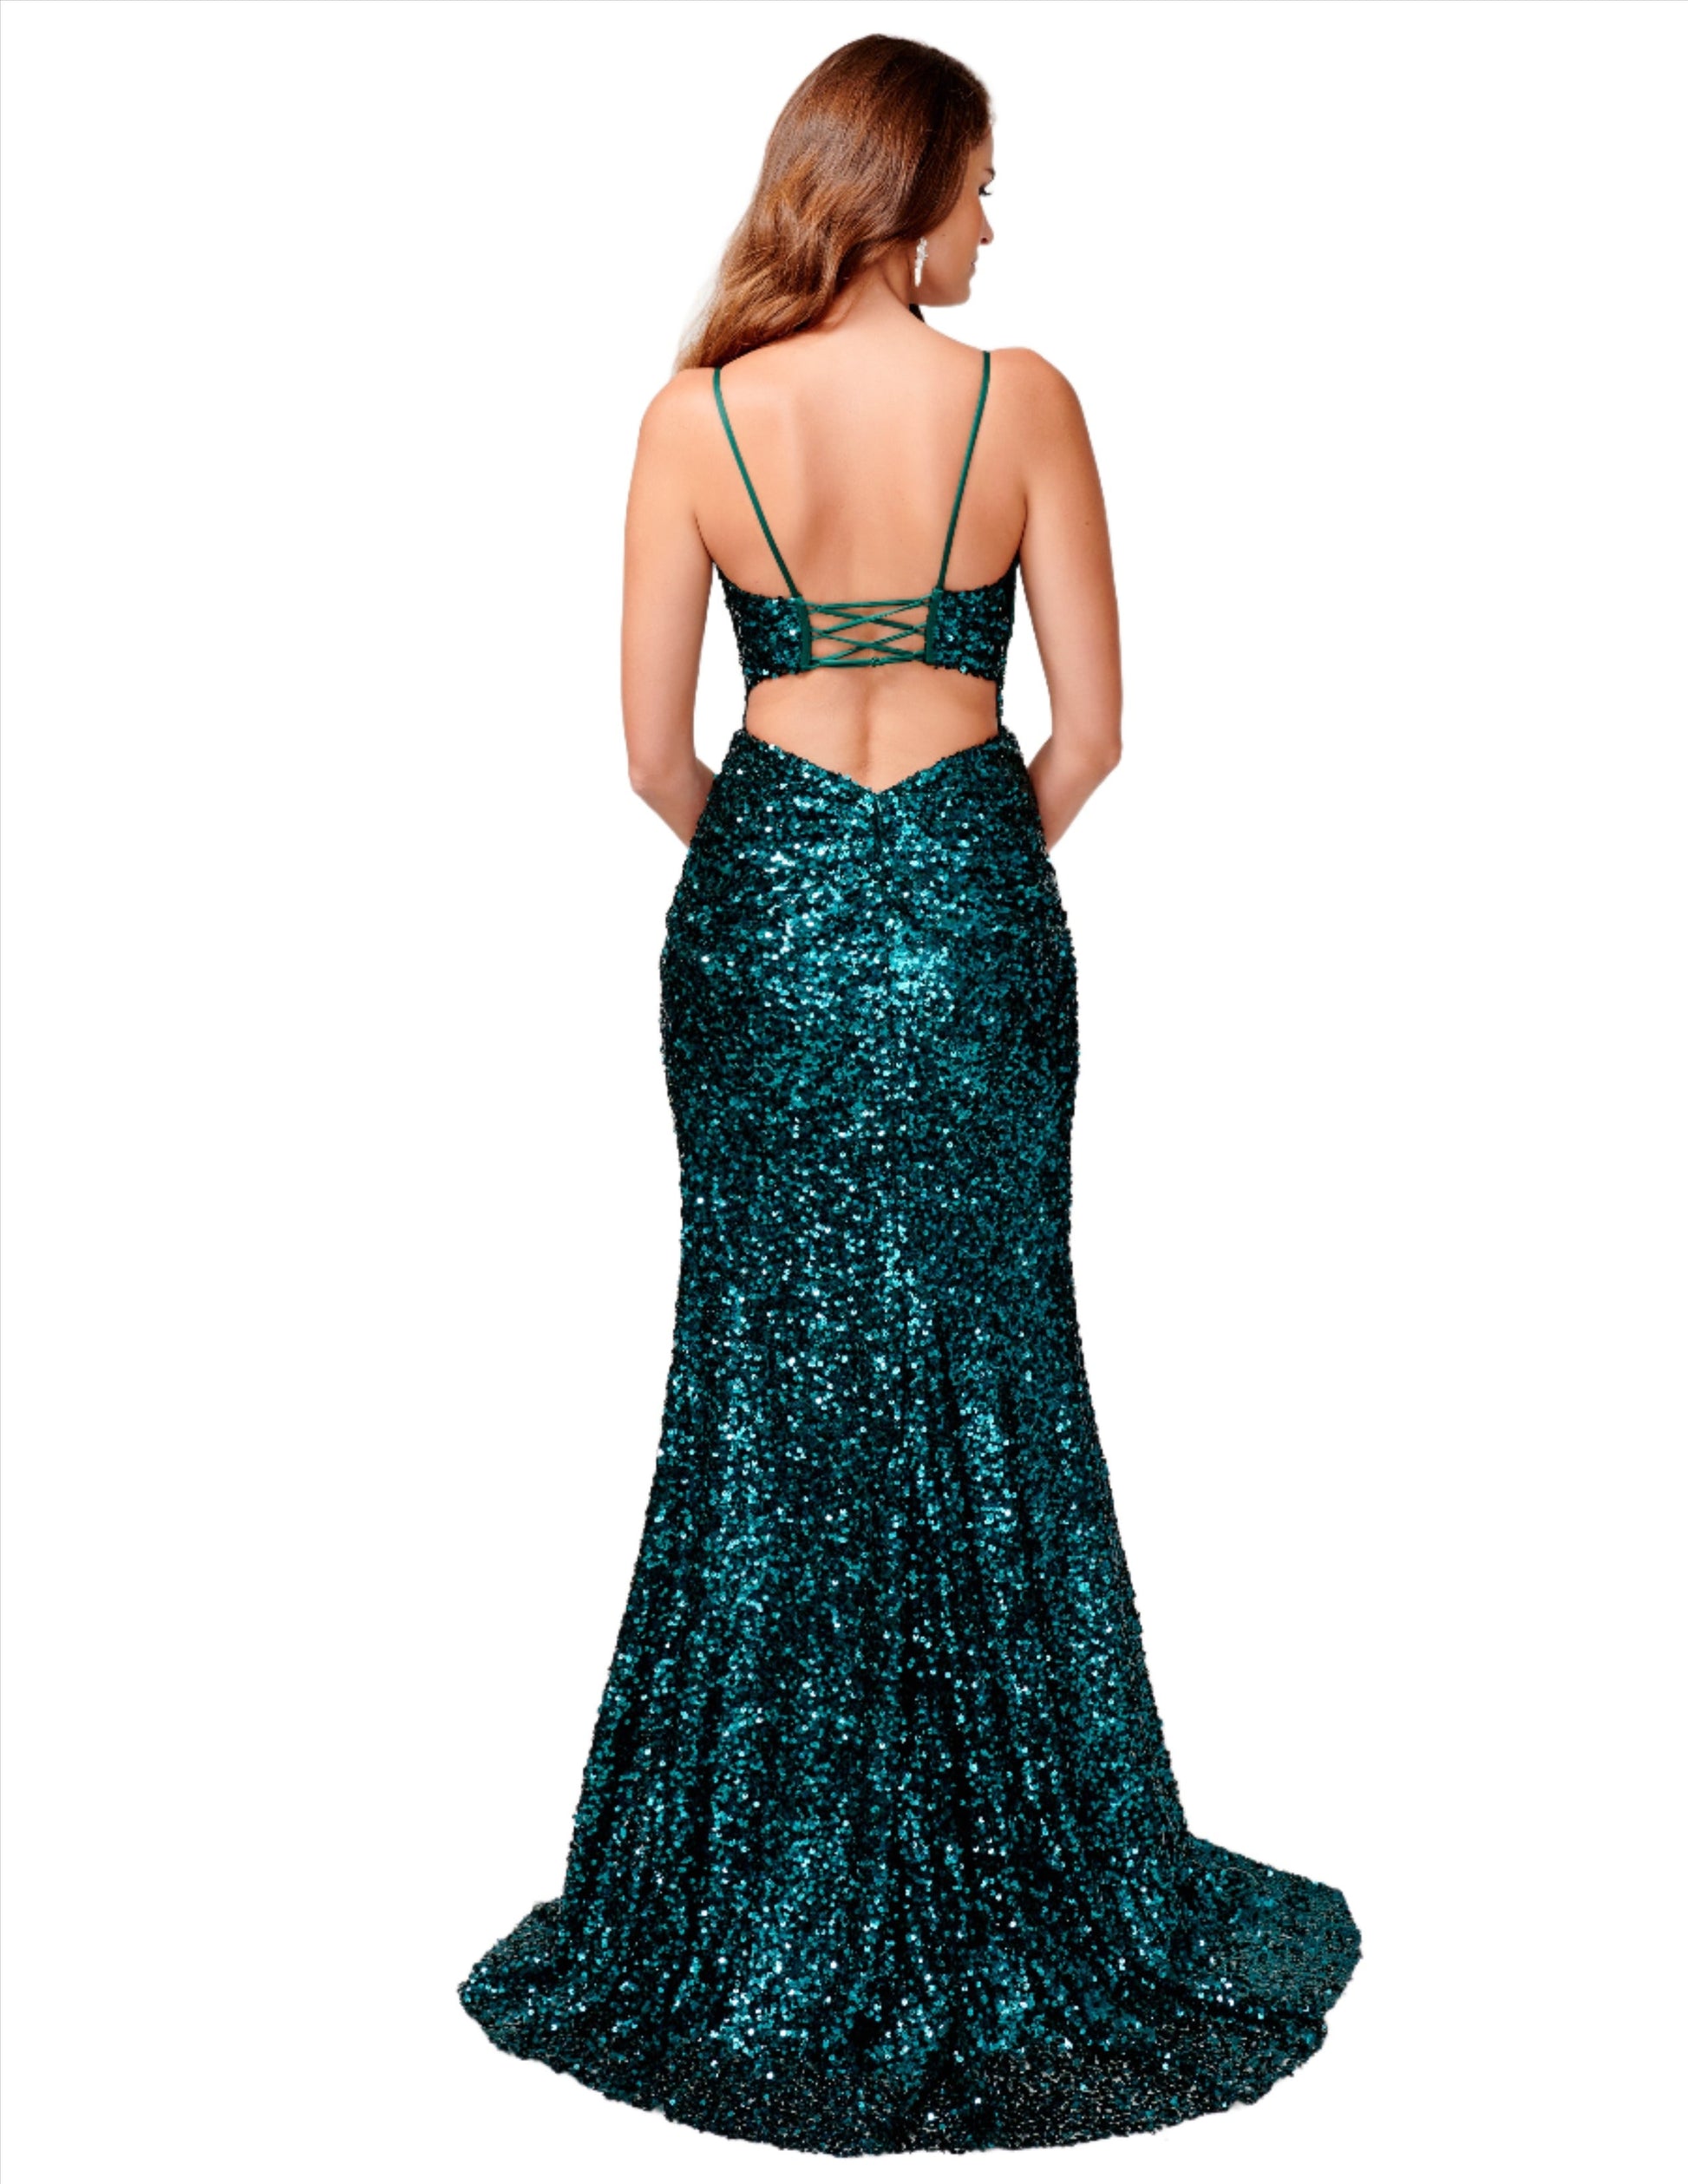 Nina Canacci 4406 Sequin Corset Prom Dress Backless Maxi Slit Formal Evening Gown